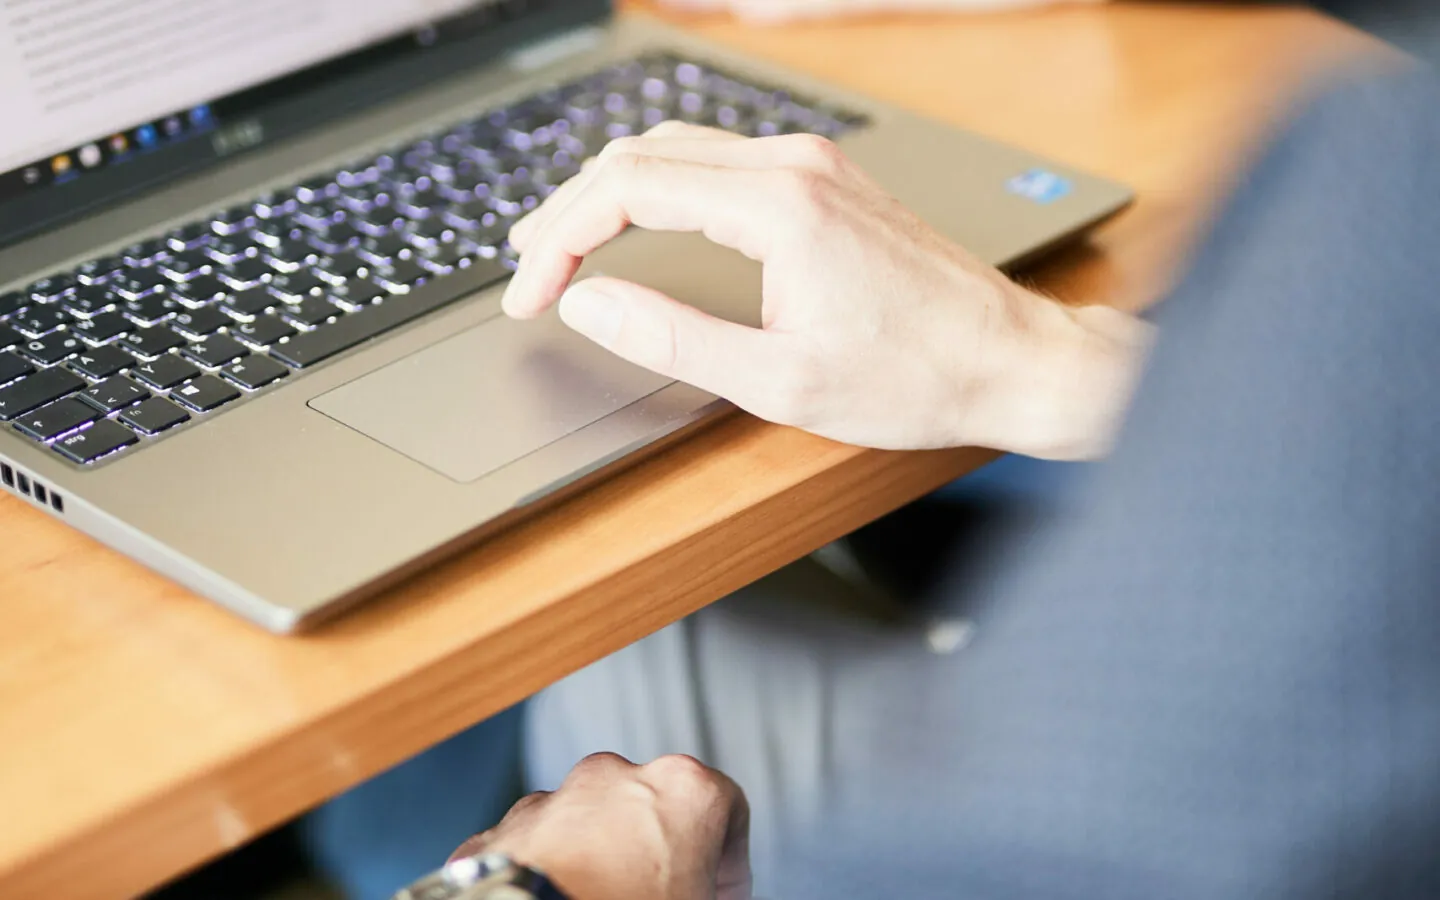 Image of a laptop on a conference table with someone's hand resting on the keyboard.